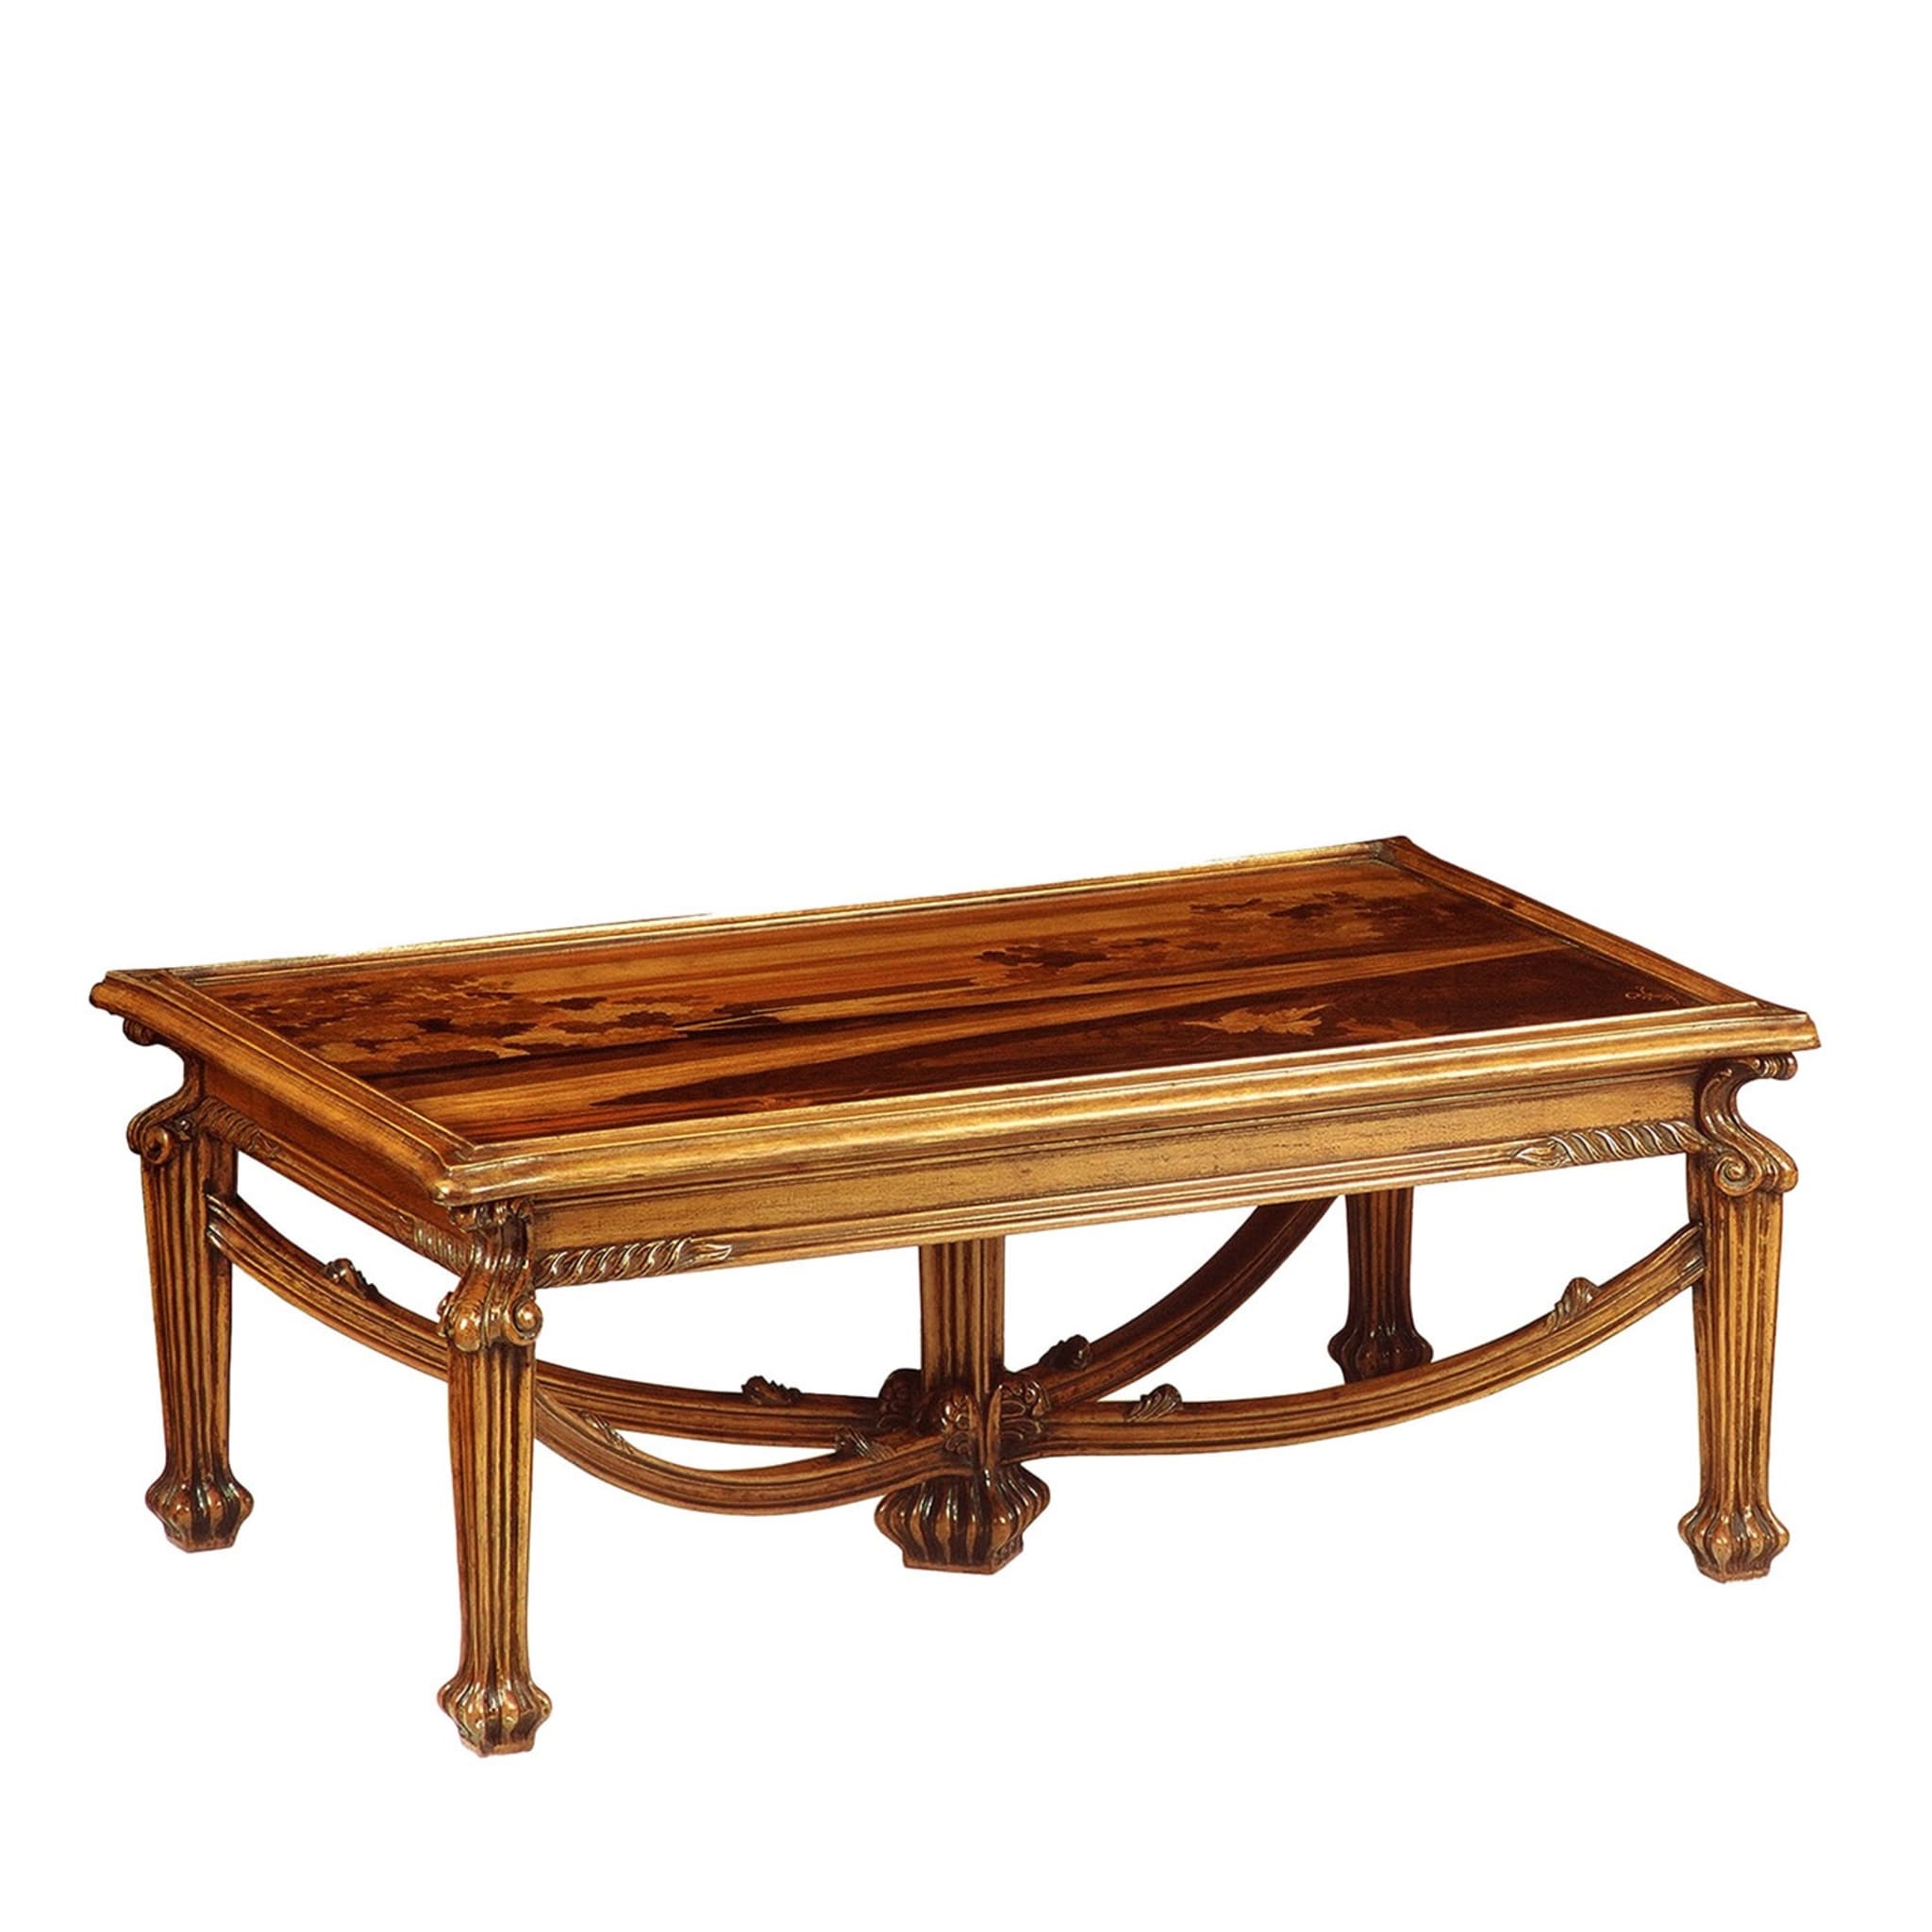 French Art Nouveau-Style Inlaid Coffee Table by Emile Gallè - Main view